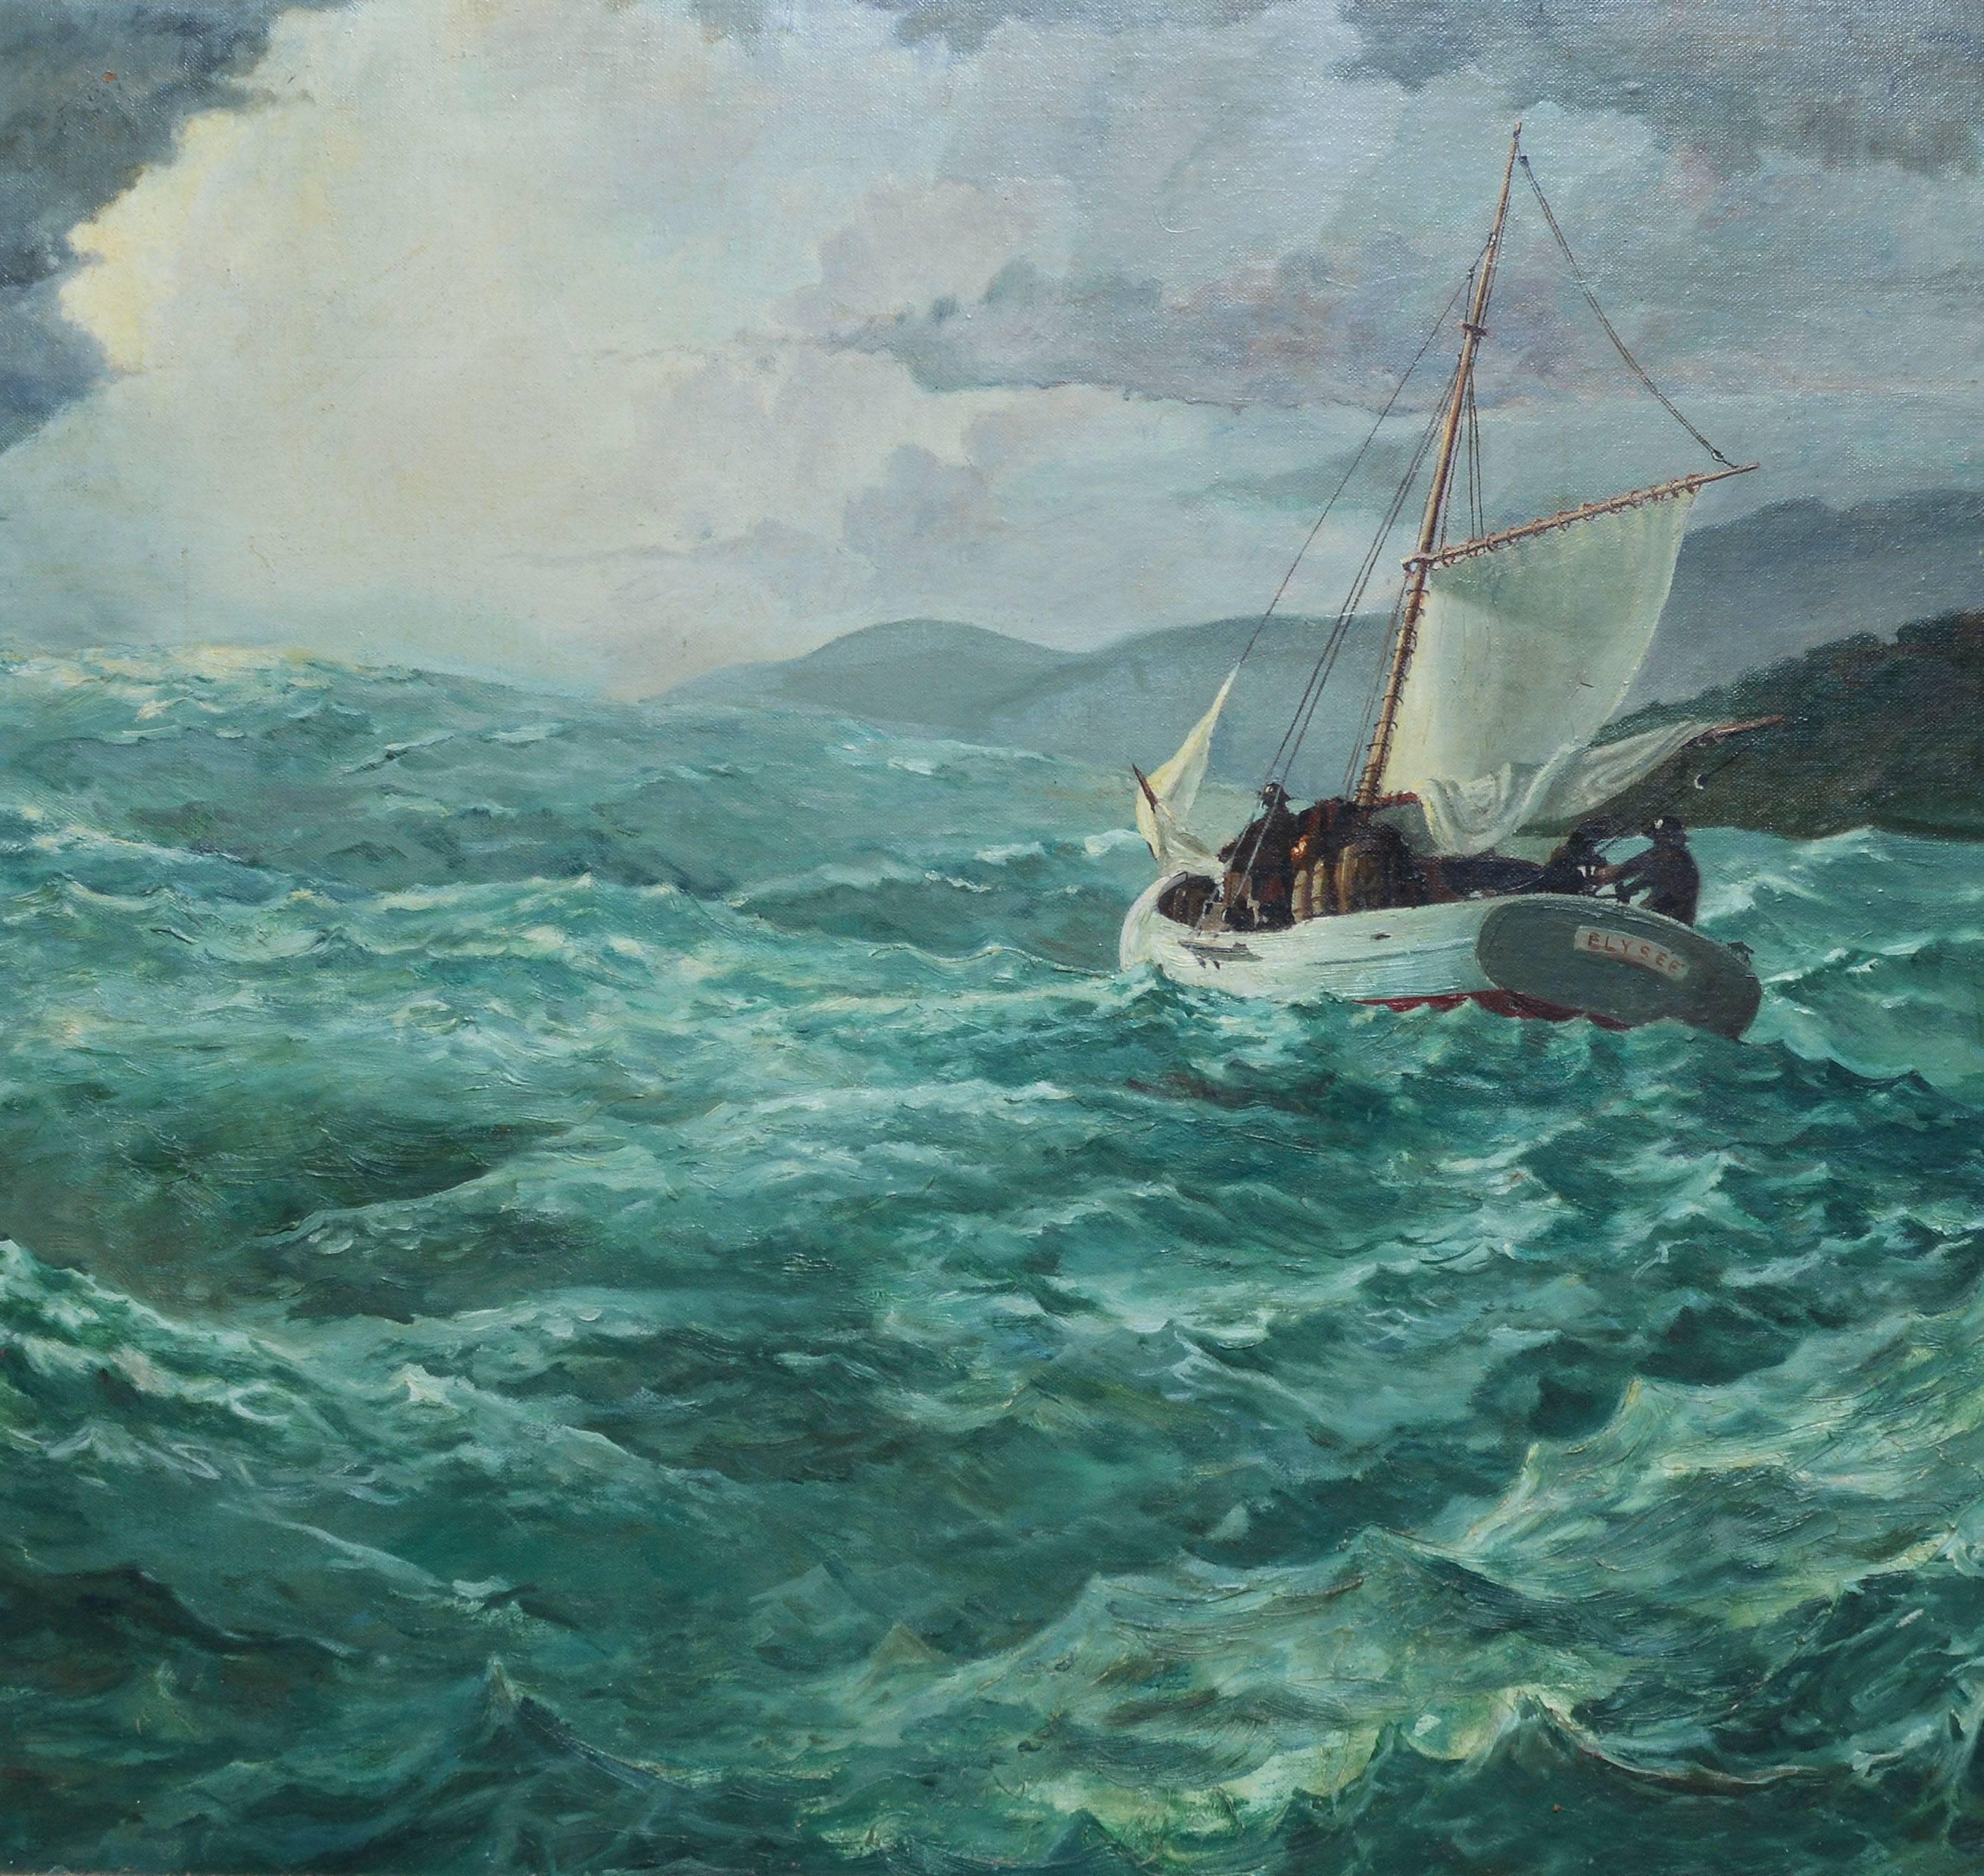 On the Sea - American Impressionist Painting by Richard Schlecht